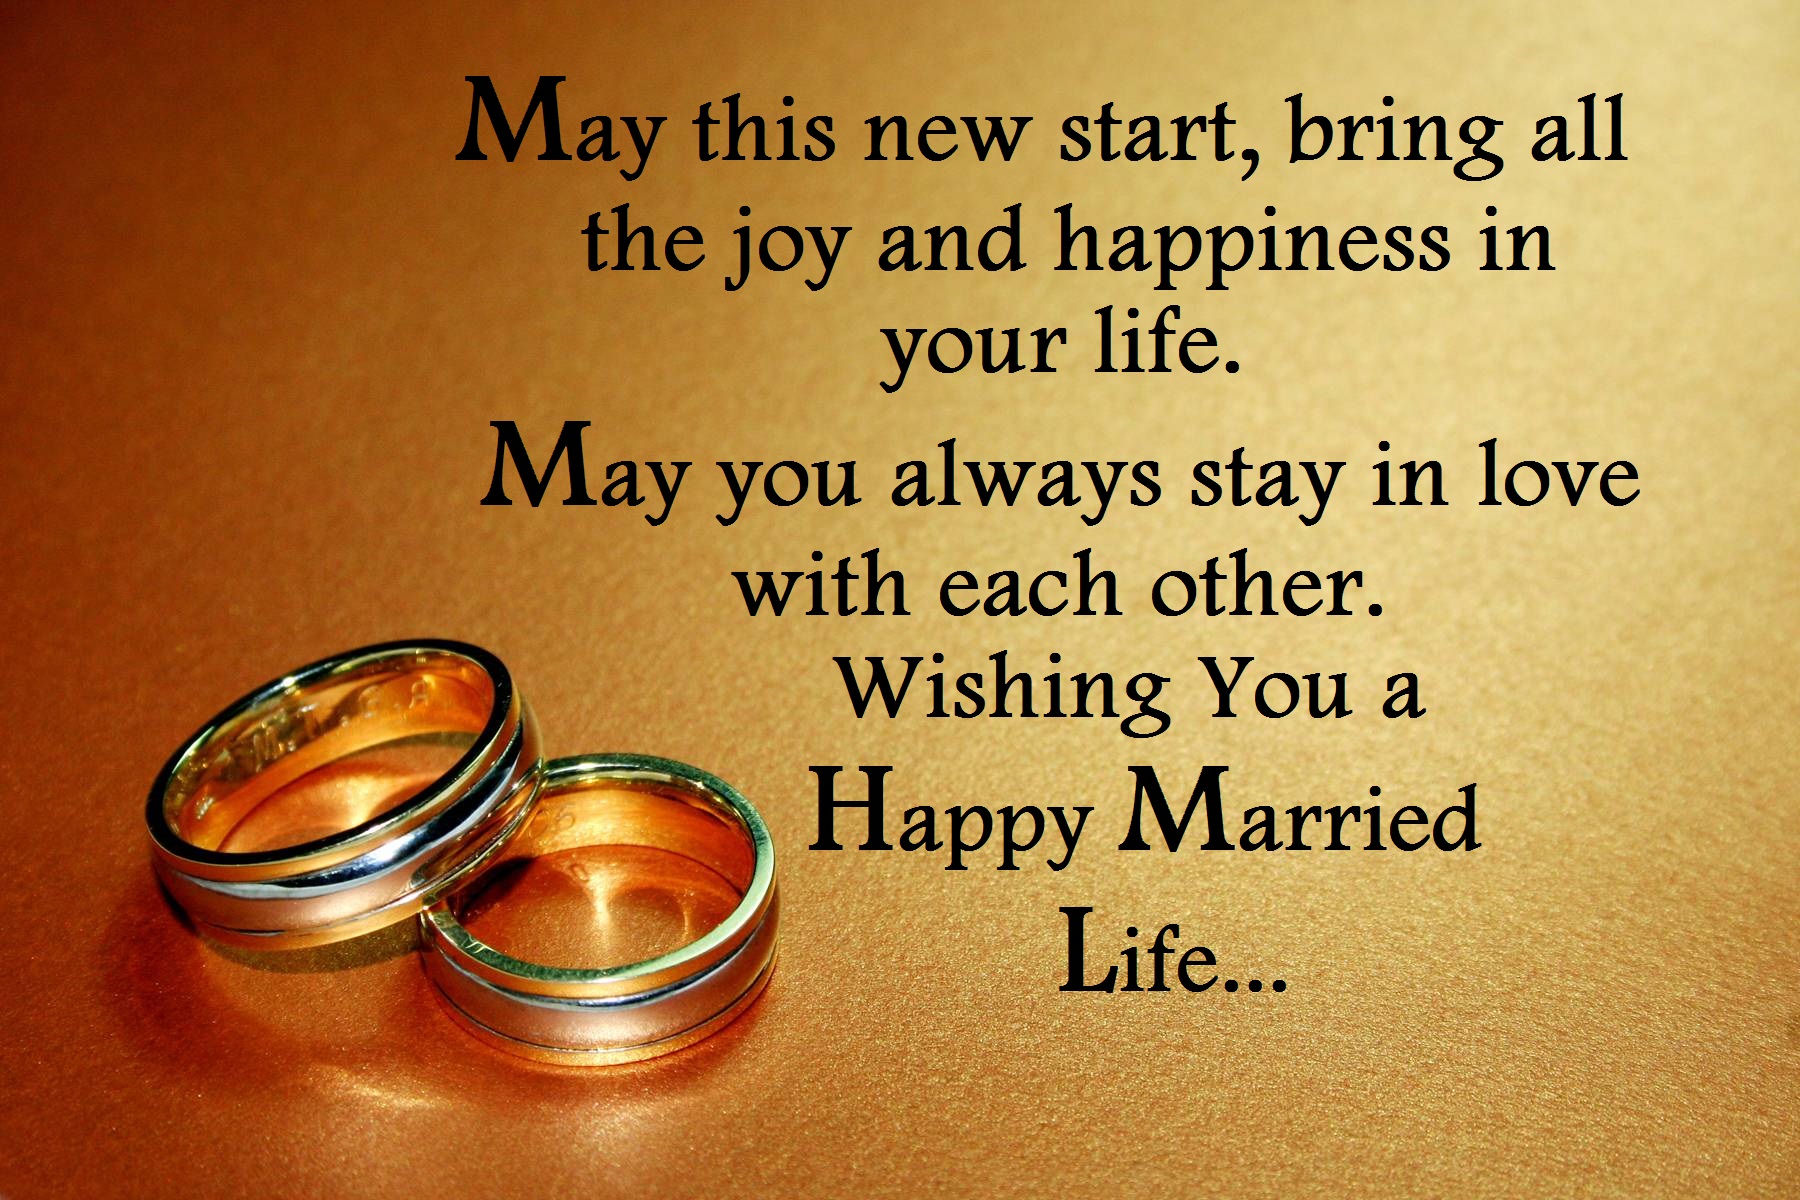 happy married life image